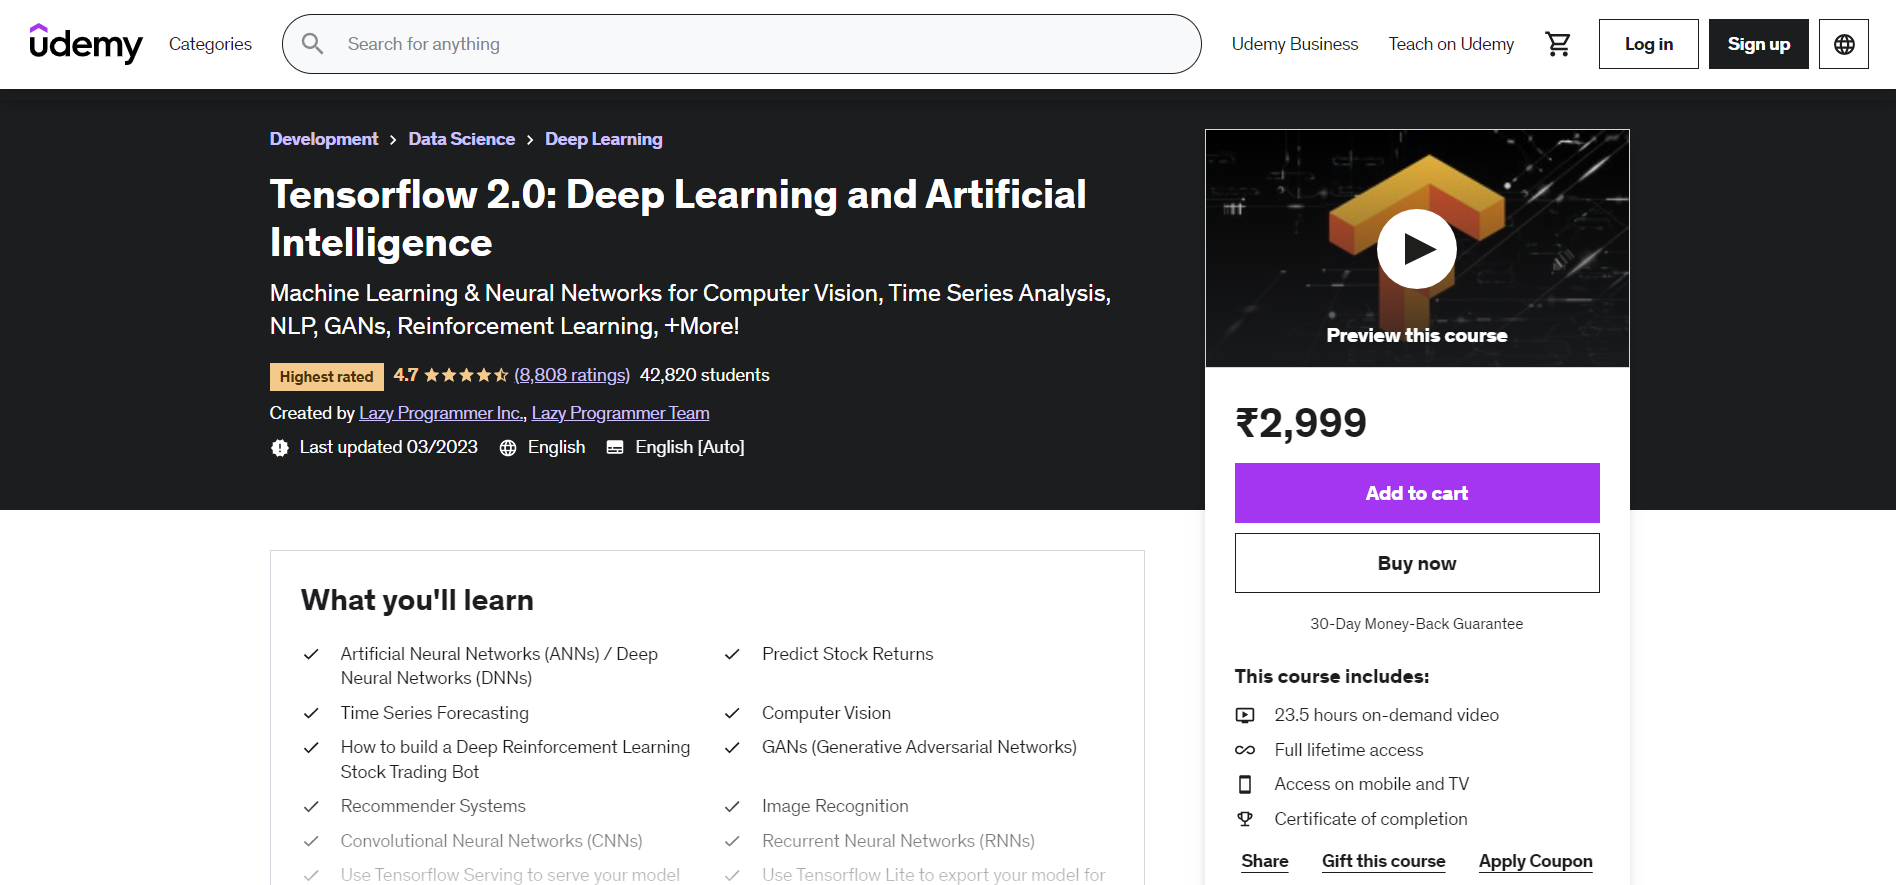 Tensorflow 2.0 Deep Learning and Artificial Intelligence